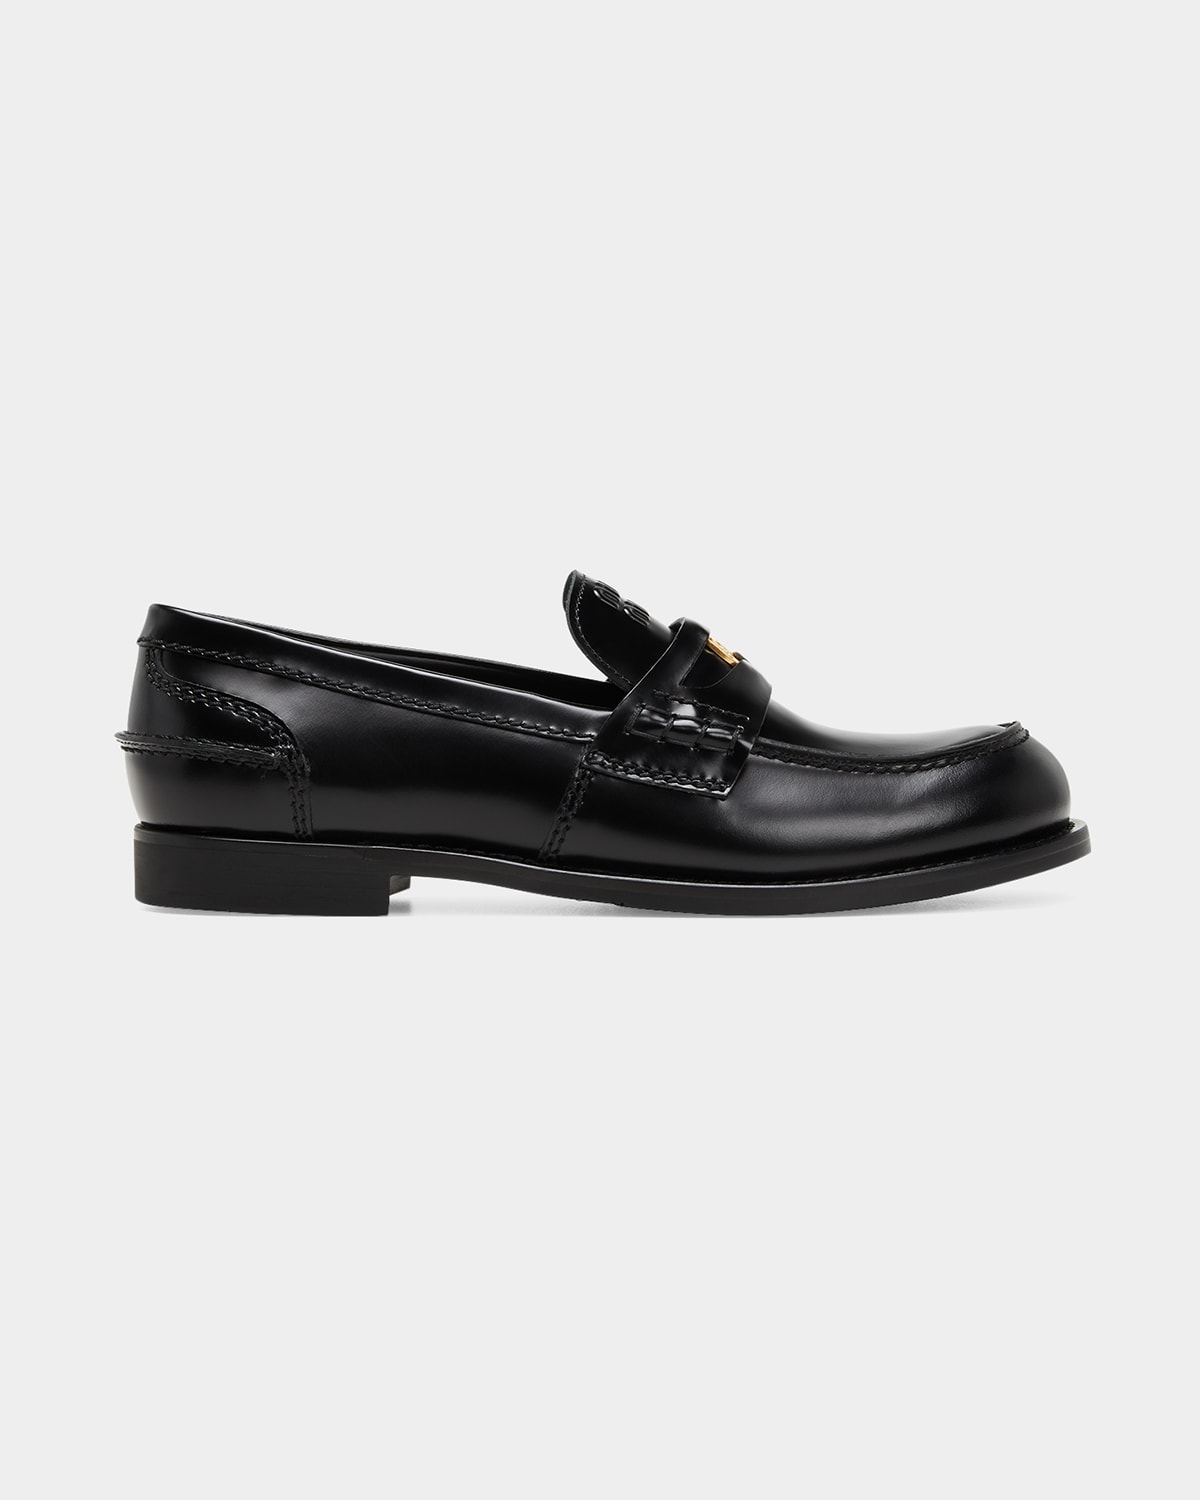 Miu Miu Patent Leather Coin Penny Loafers | Neiman Marcus